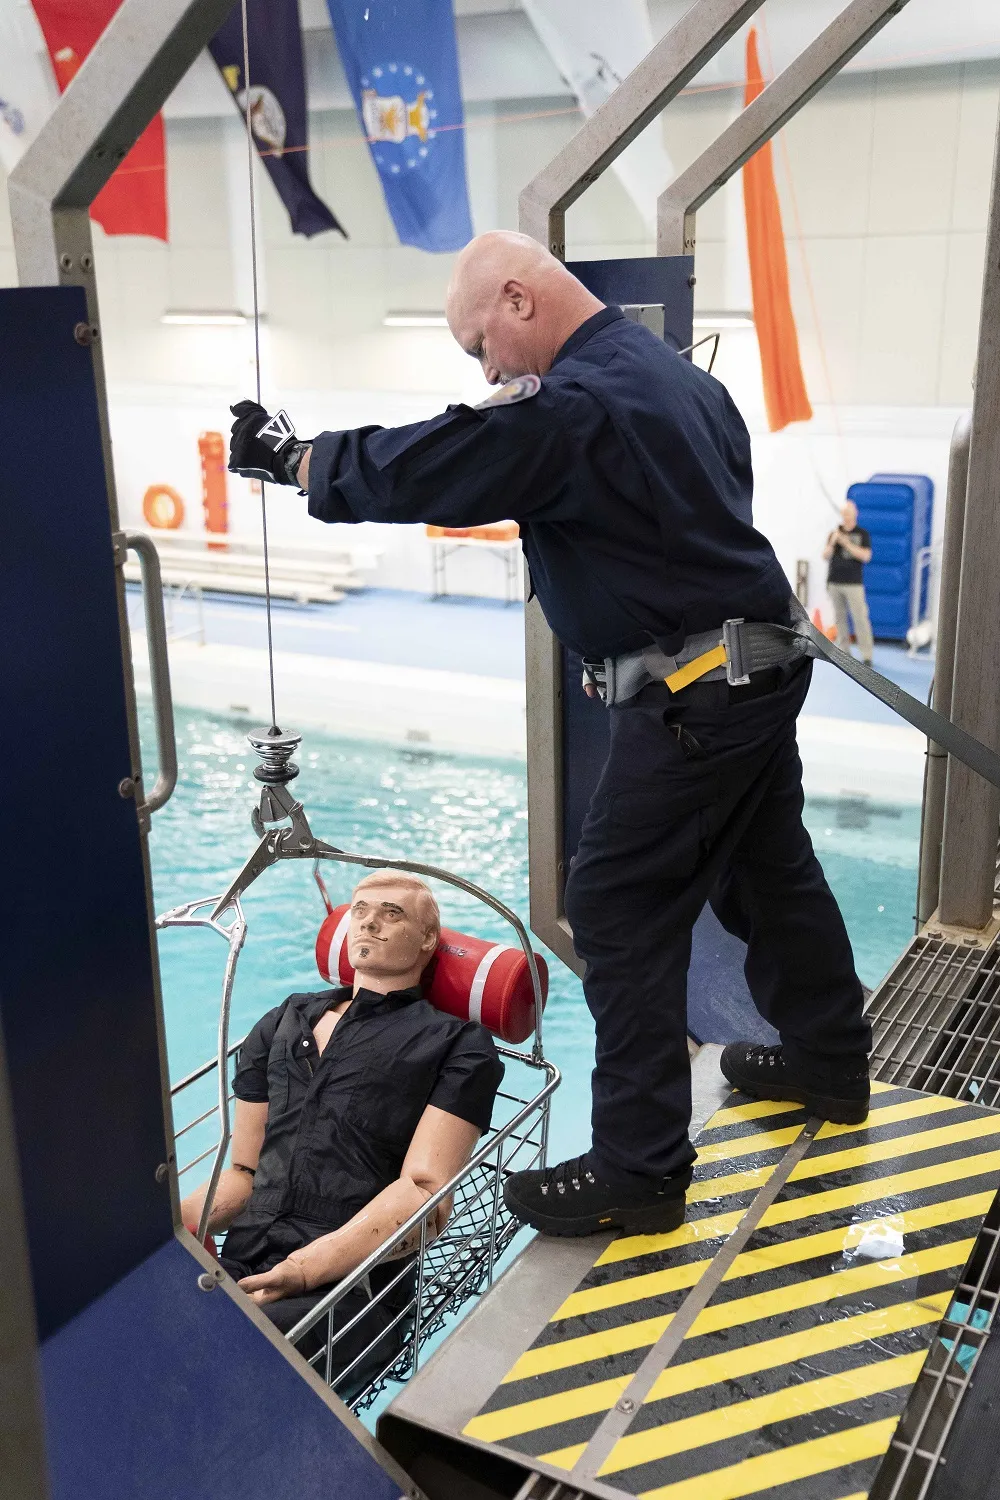 Evaluator participating in a rescue scenario at the operational field assessment at United States Coast Guard Aviation Technical Training Center in Elizabeth City, North Carolina.